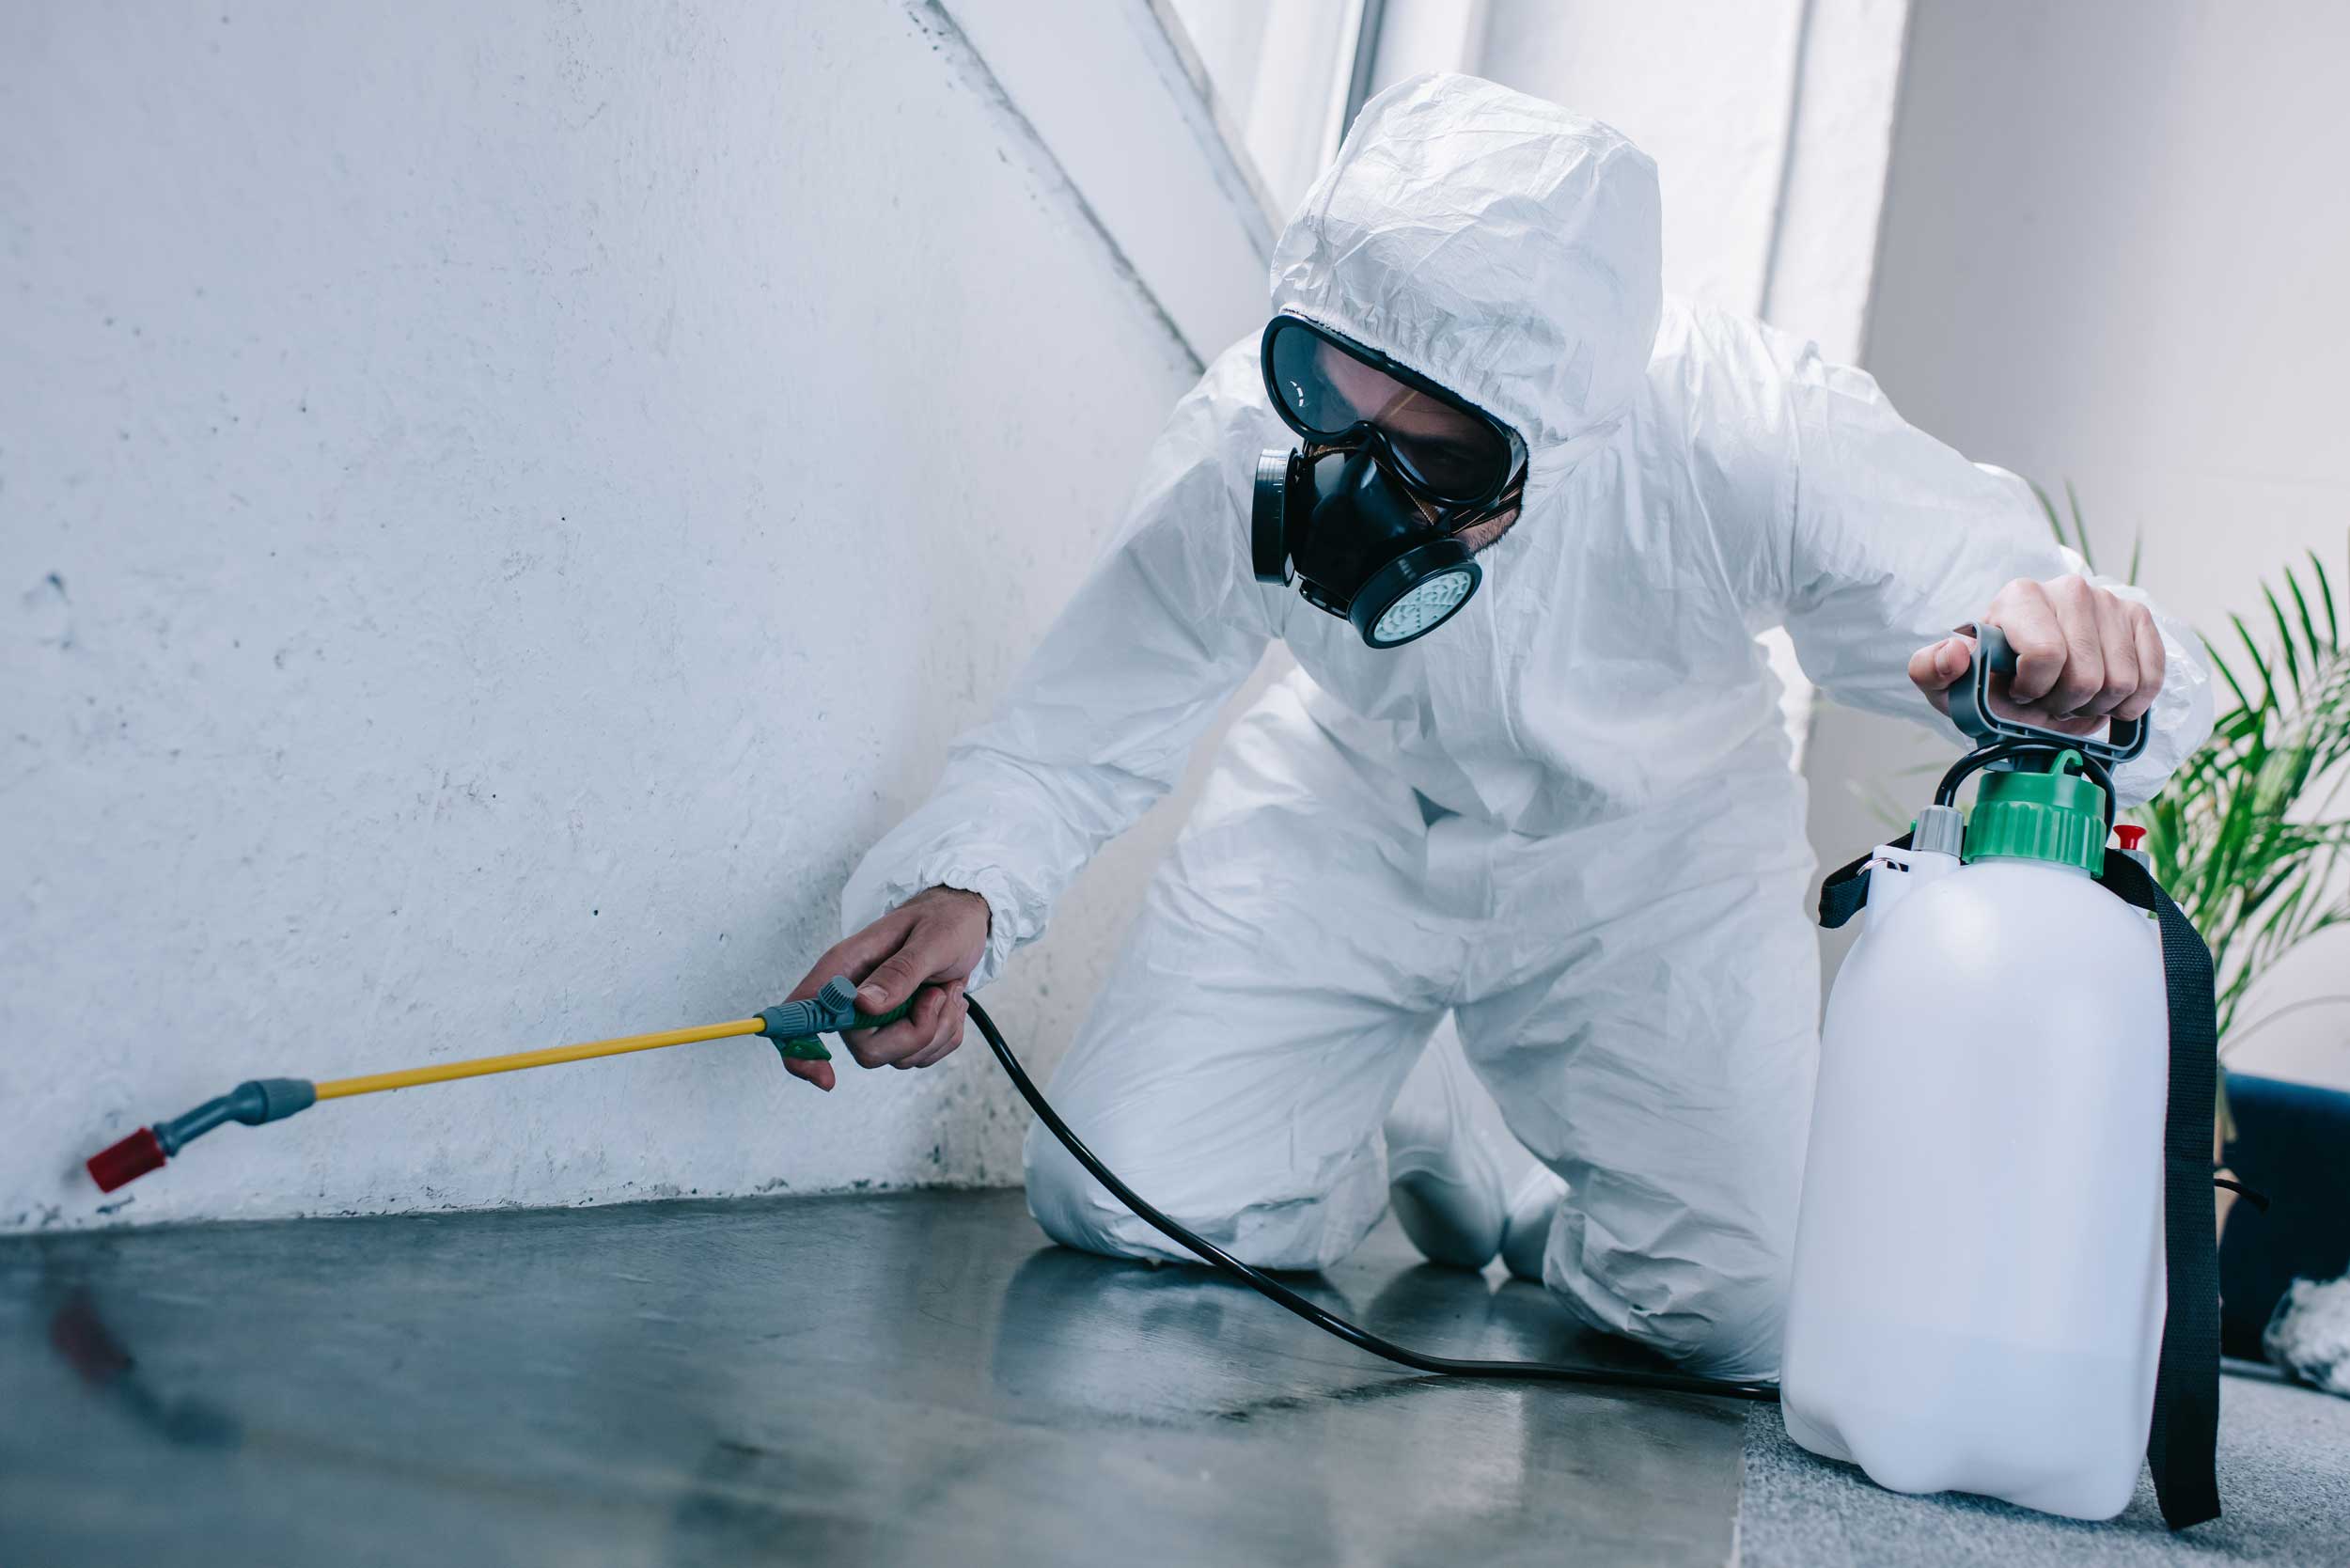 Exterminator in suit spraying for bugs